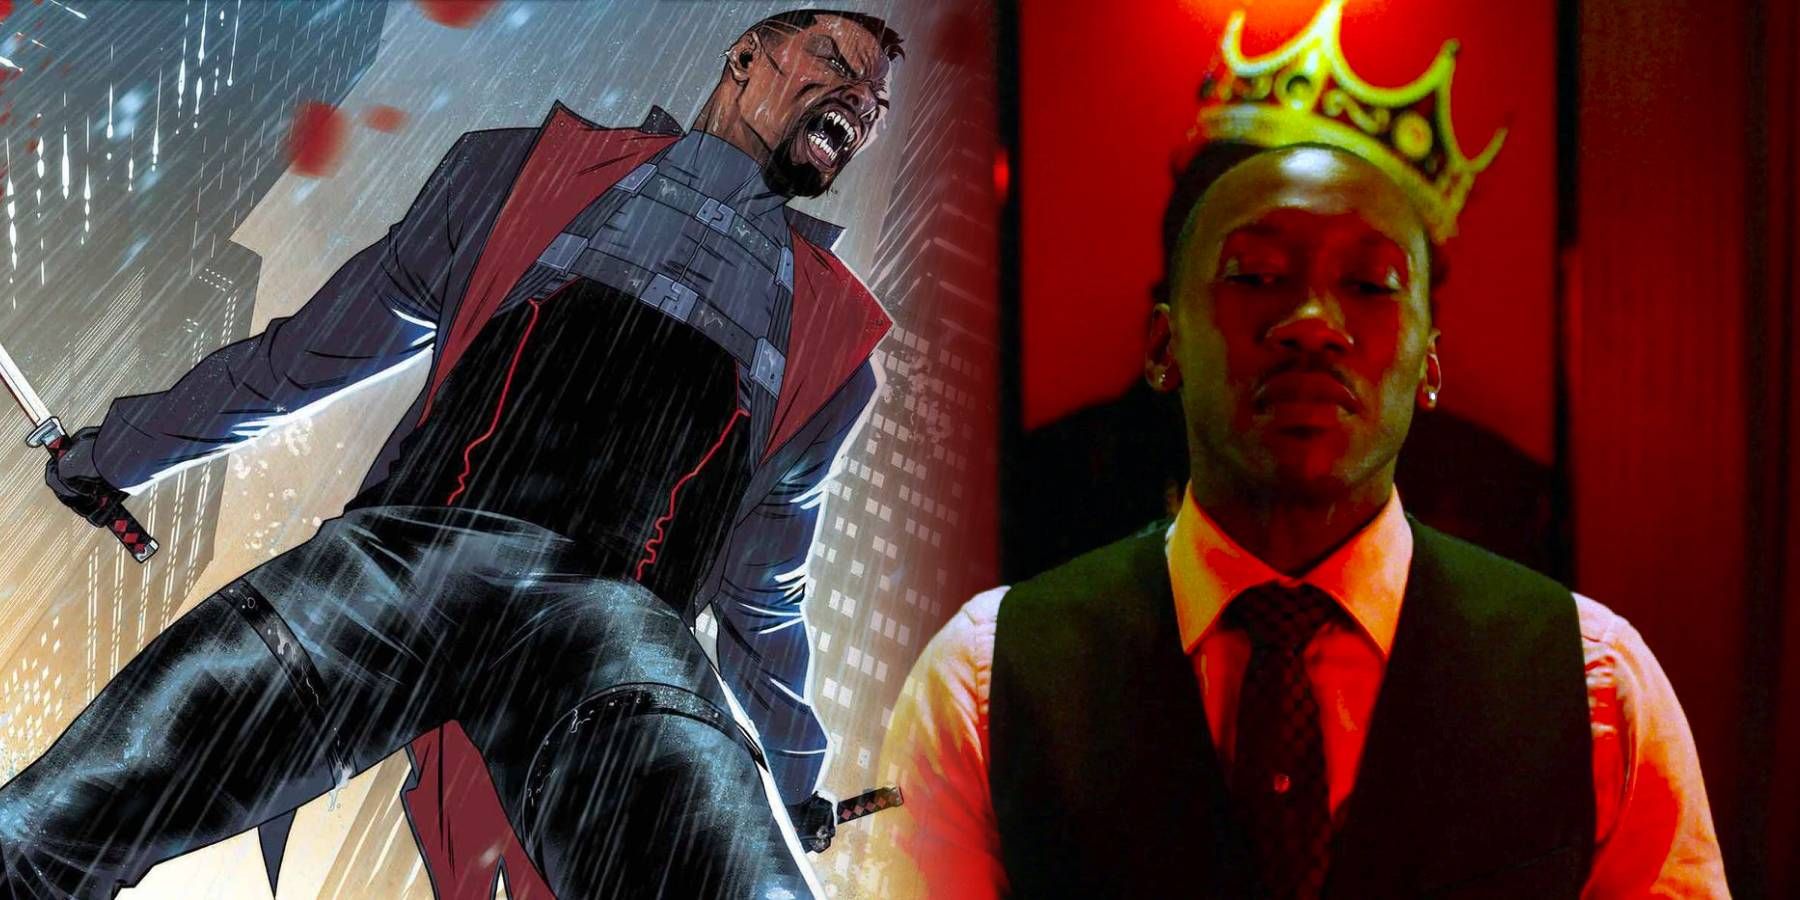 Marvel Comics character Blade with actor Mahershala Ali as seen as Cottonmouth on the Marvel series Luke Cage